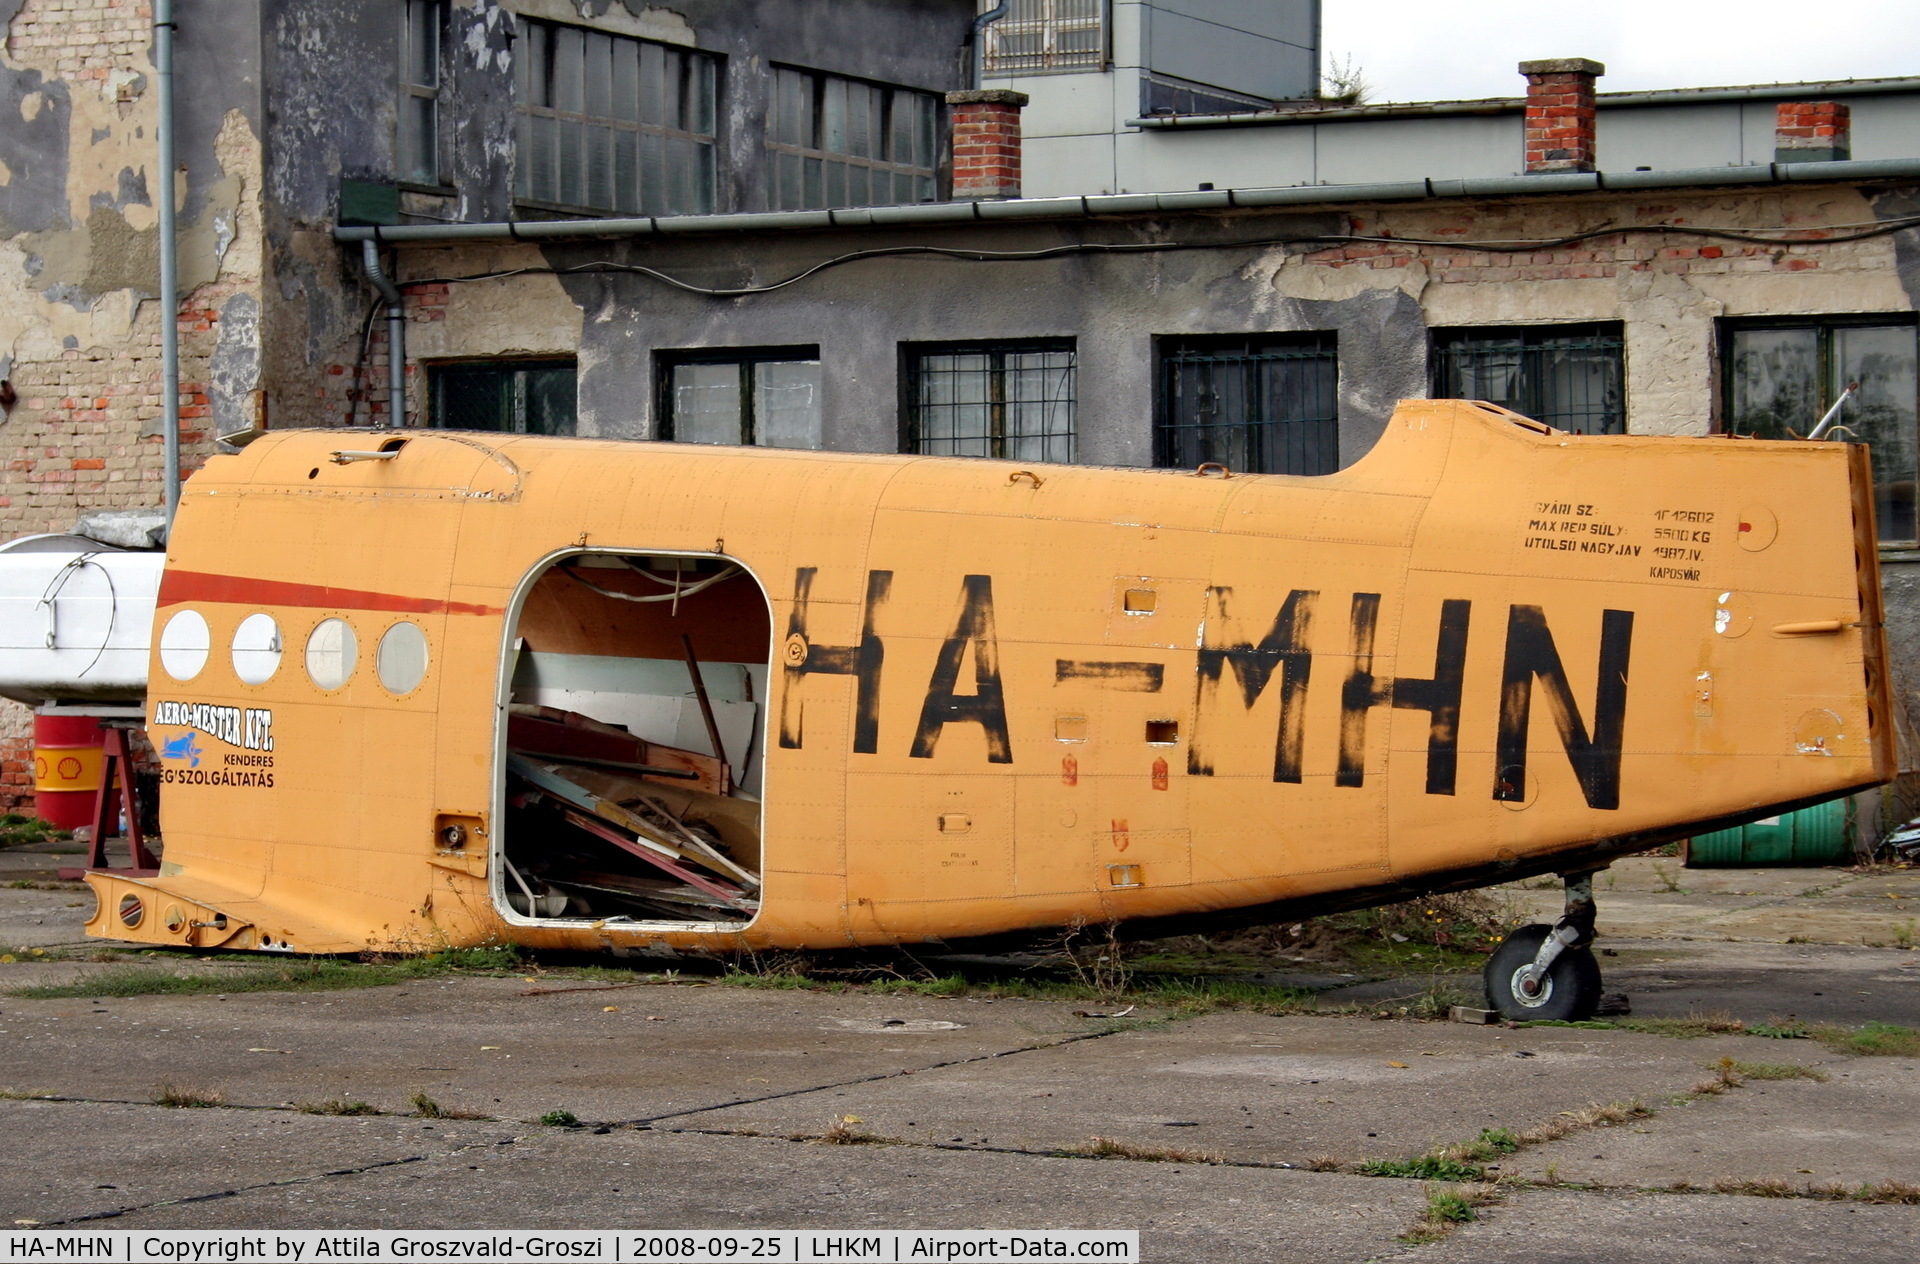 HA-MHN, 1971 PZL-Mielec An-2R C/N 1G126-02, Kunmadaras Airport, Hungary - Part of the pilot's cabin, presented at the Budapest Traffic Museum.